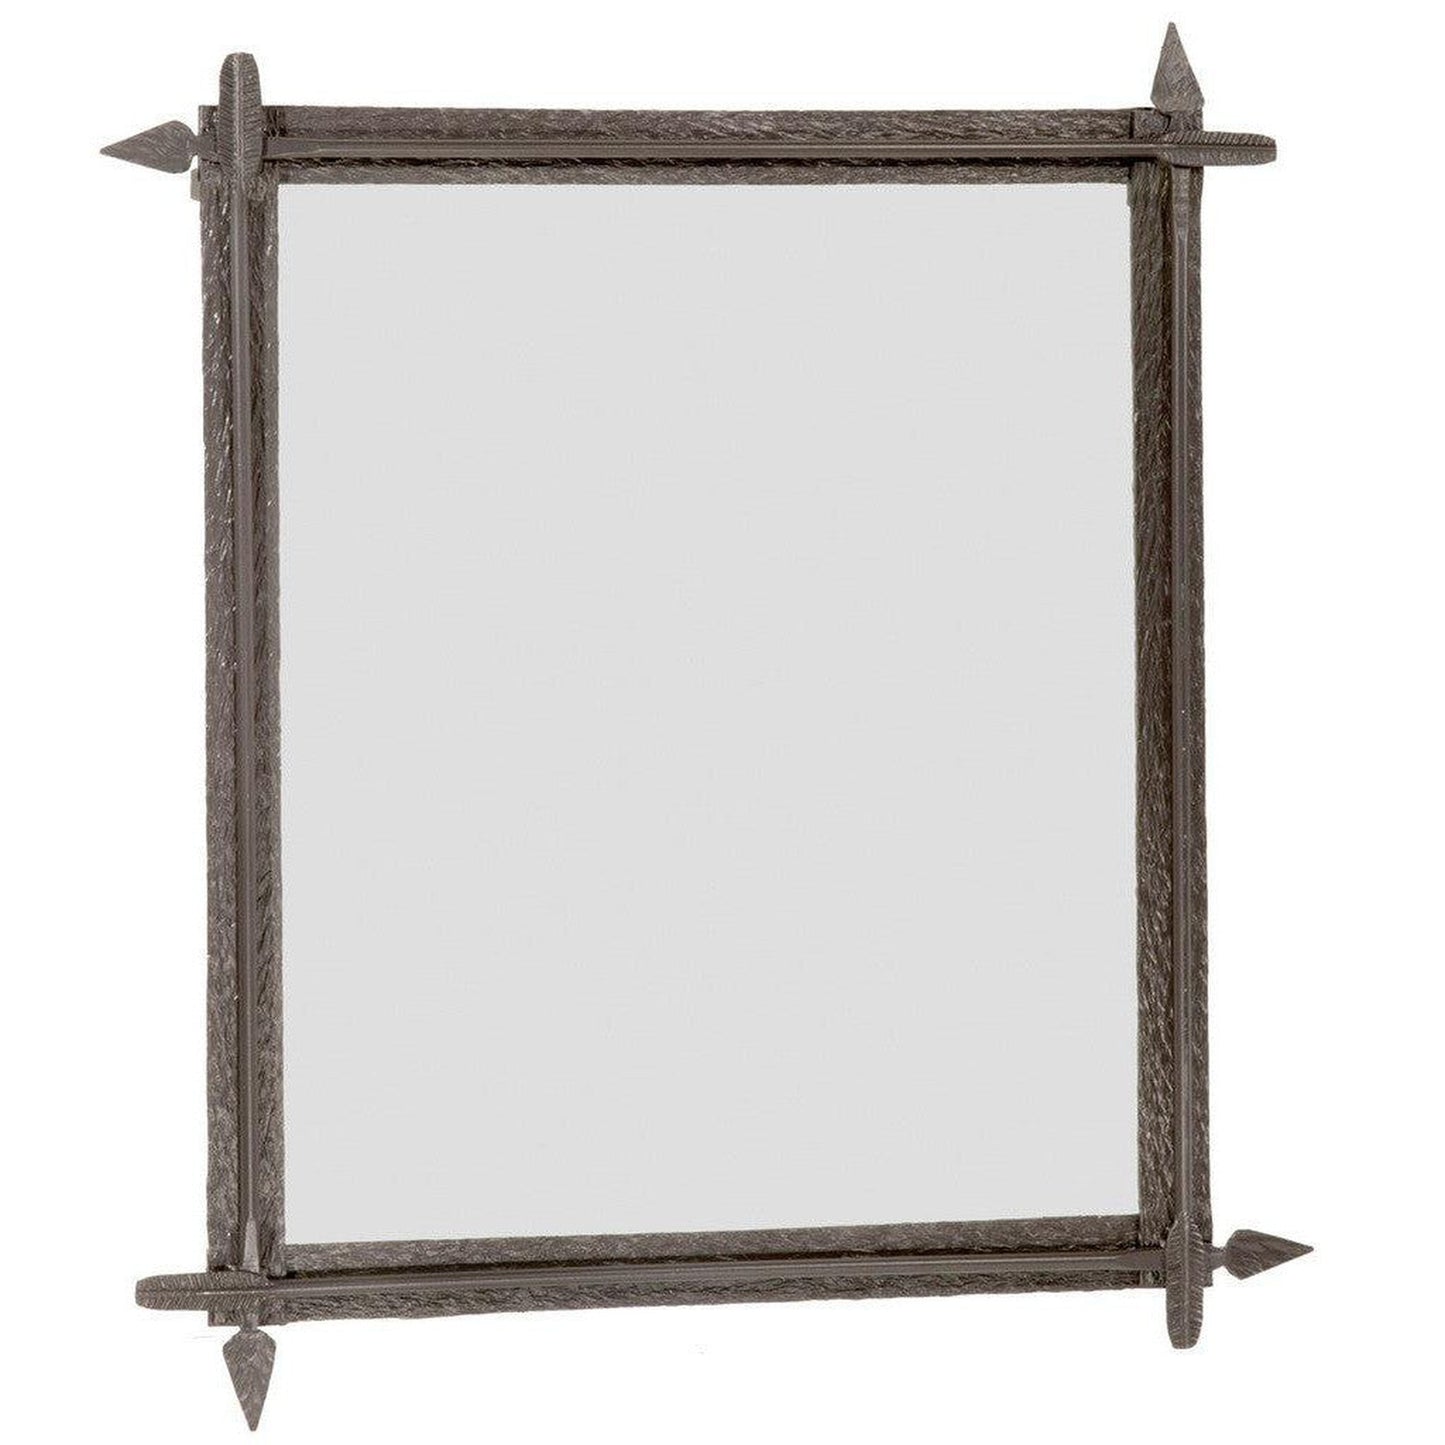 Stone County Ironworks Quapaw 31" x 43" Large Hand Rubbed Brass Iron Wall Mirror